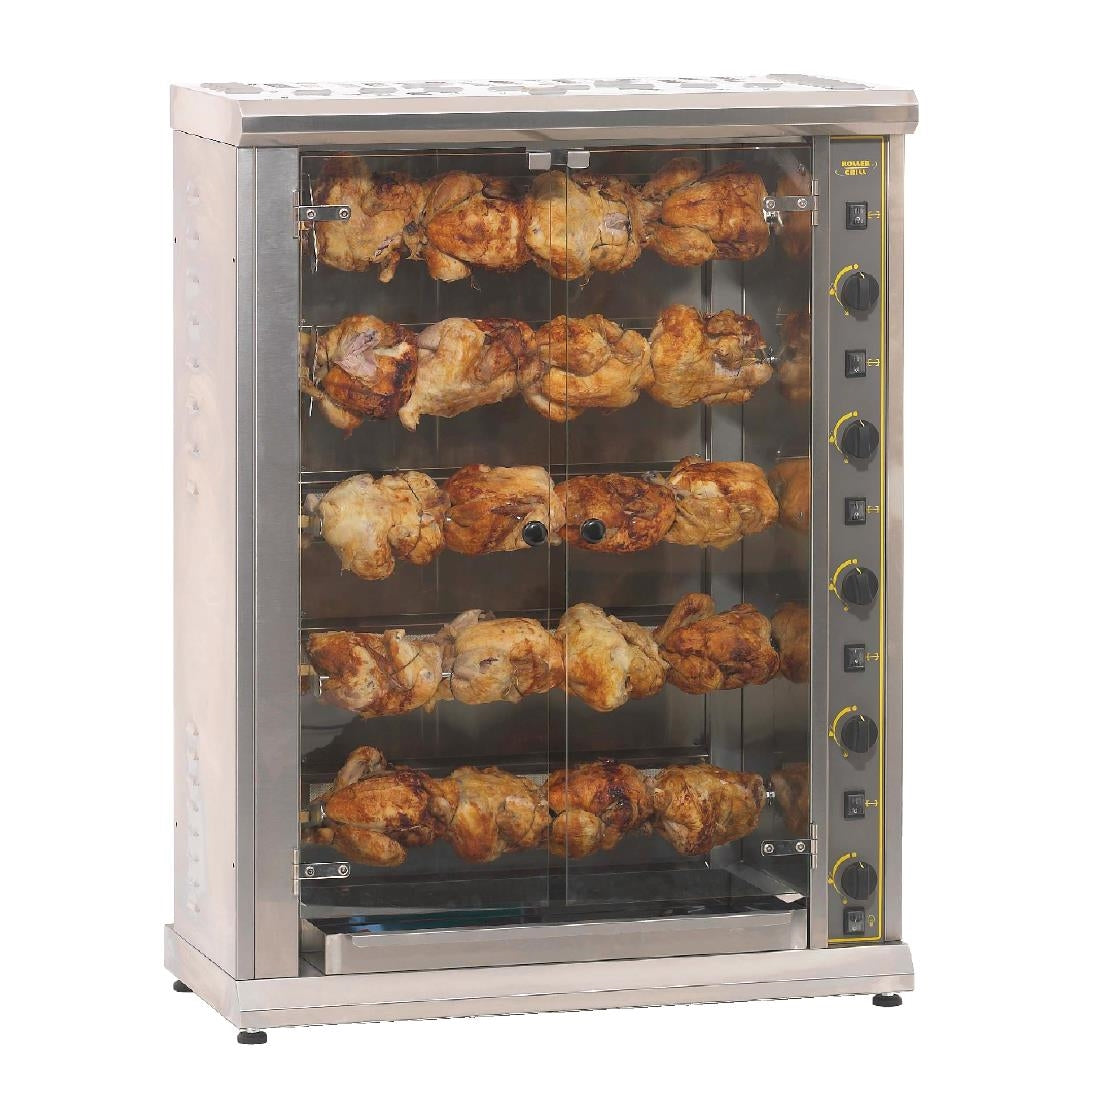 GD369 Roller Grill Electric Rotisserie RBE 200 JD Catering Equipment Solutions Ltd